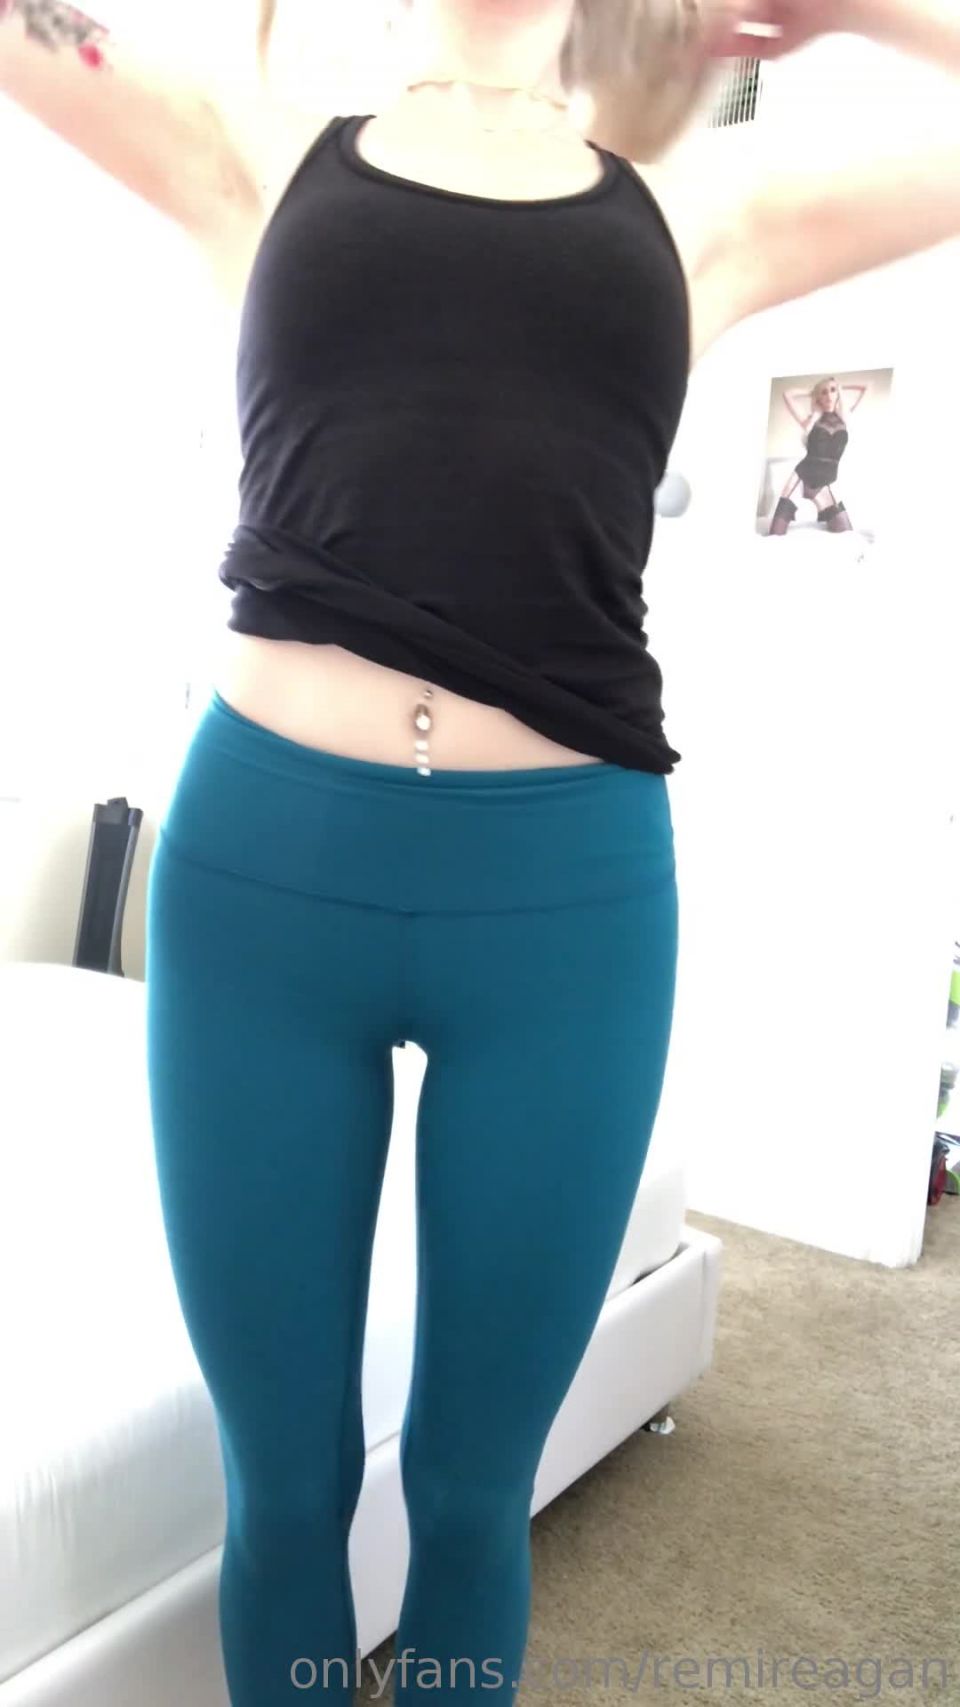 Remi Reagan () Remireagan - taking my workout clothes off with a booty like this isinteresting 24-05-2019